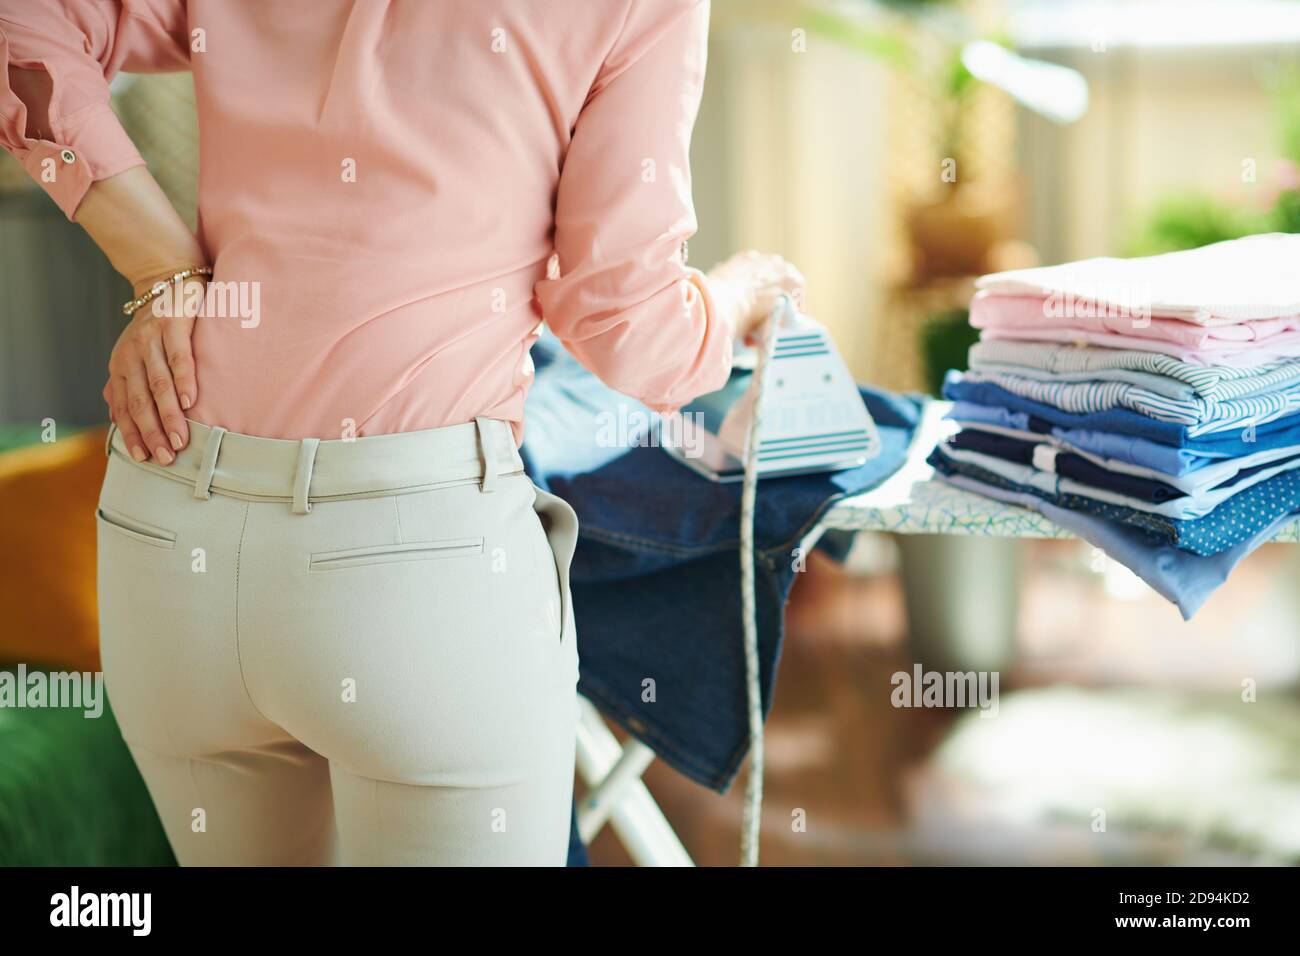 Seen From Behind Woman In Pink Shirt And White Pants With Pile Of Folded Ironed Clothes Having Back Pain While Ironing On Ironing Board In The House I Stock Photo Alamy alamy